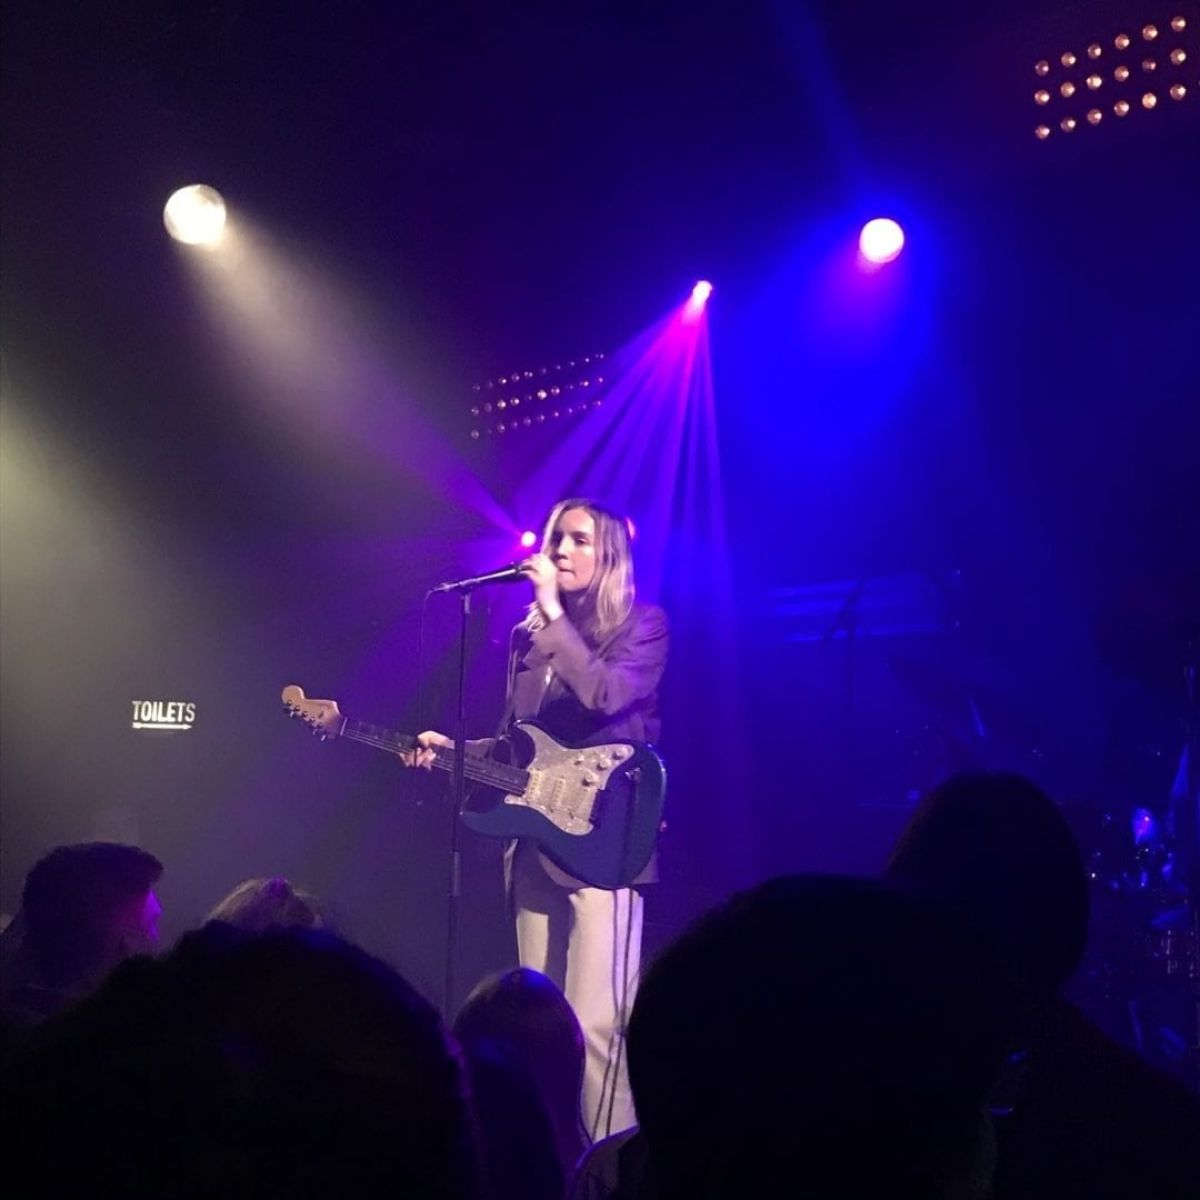 Live Review: The Japanese House